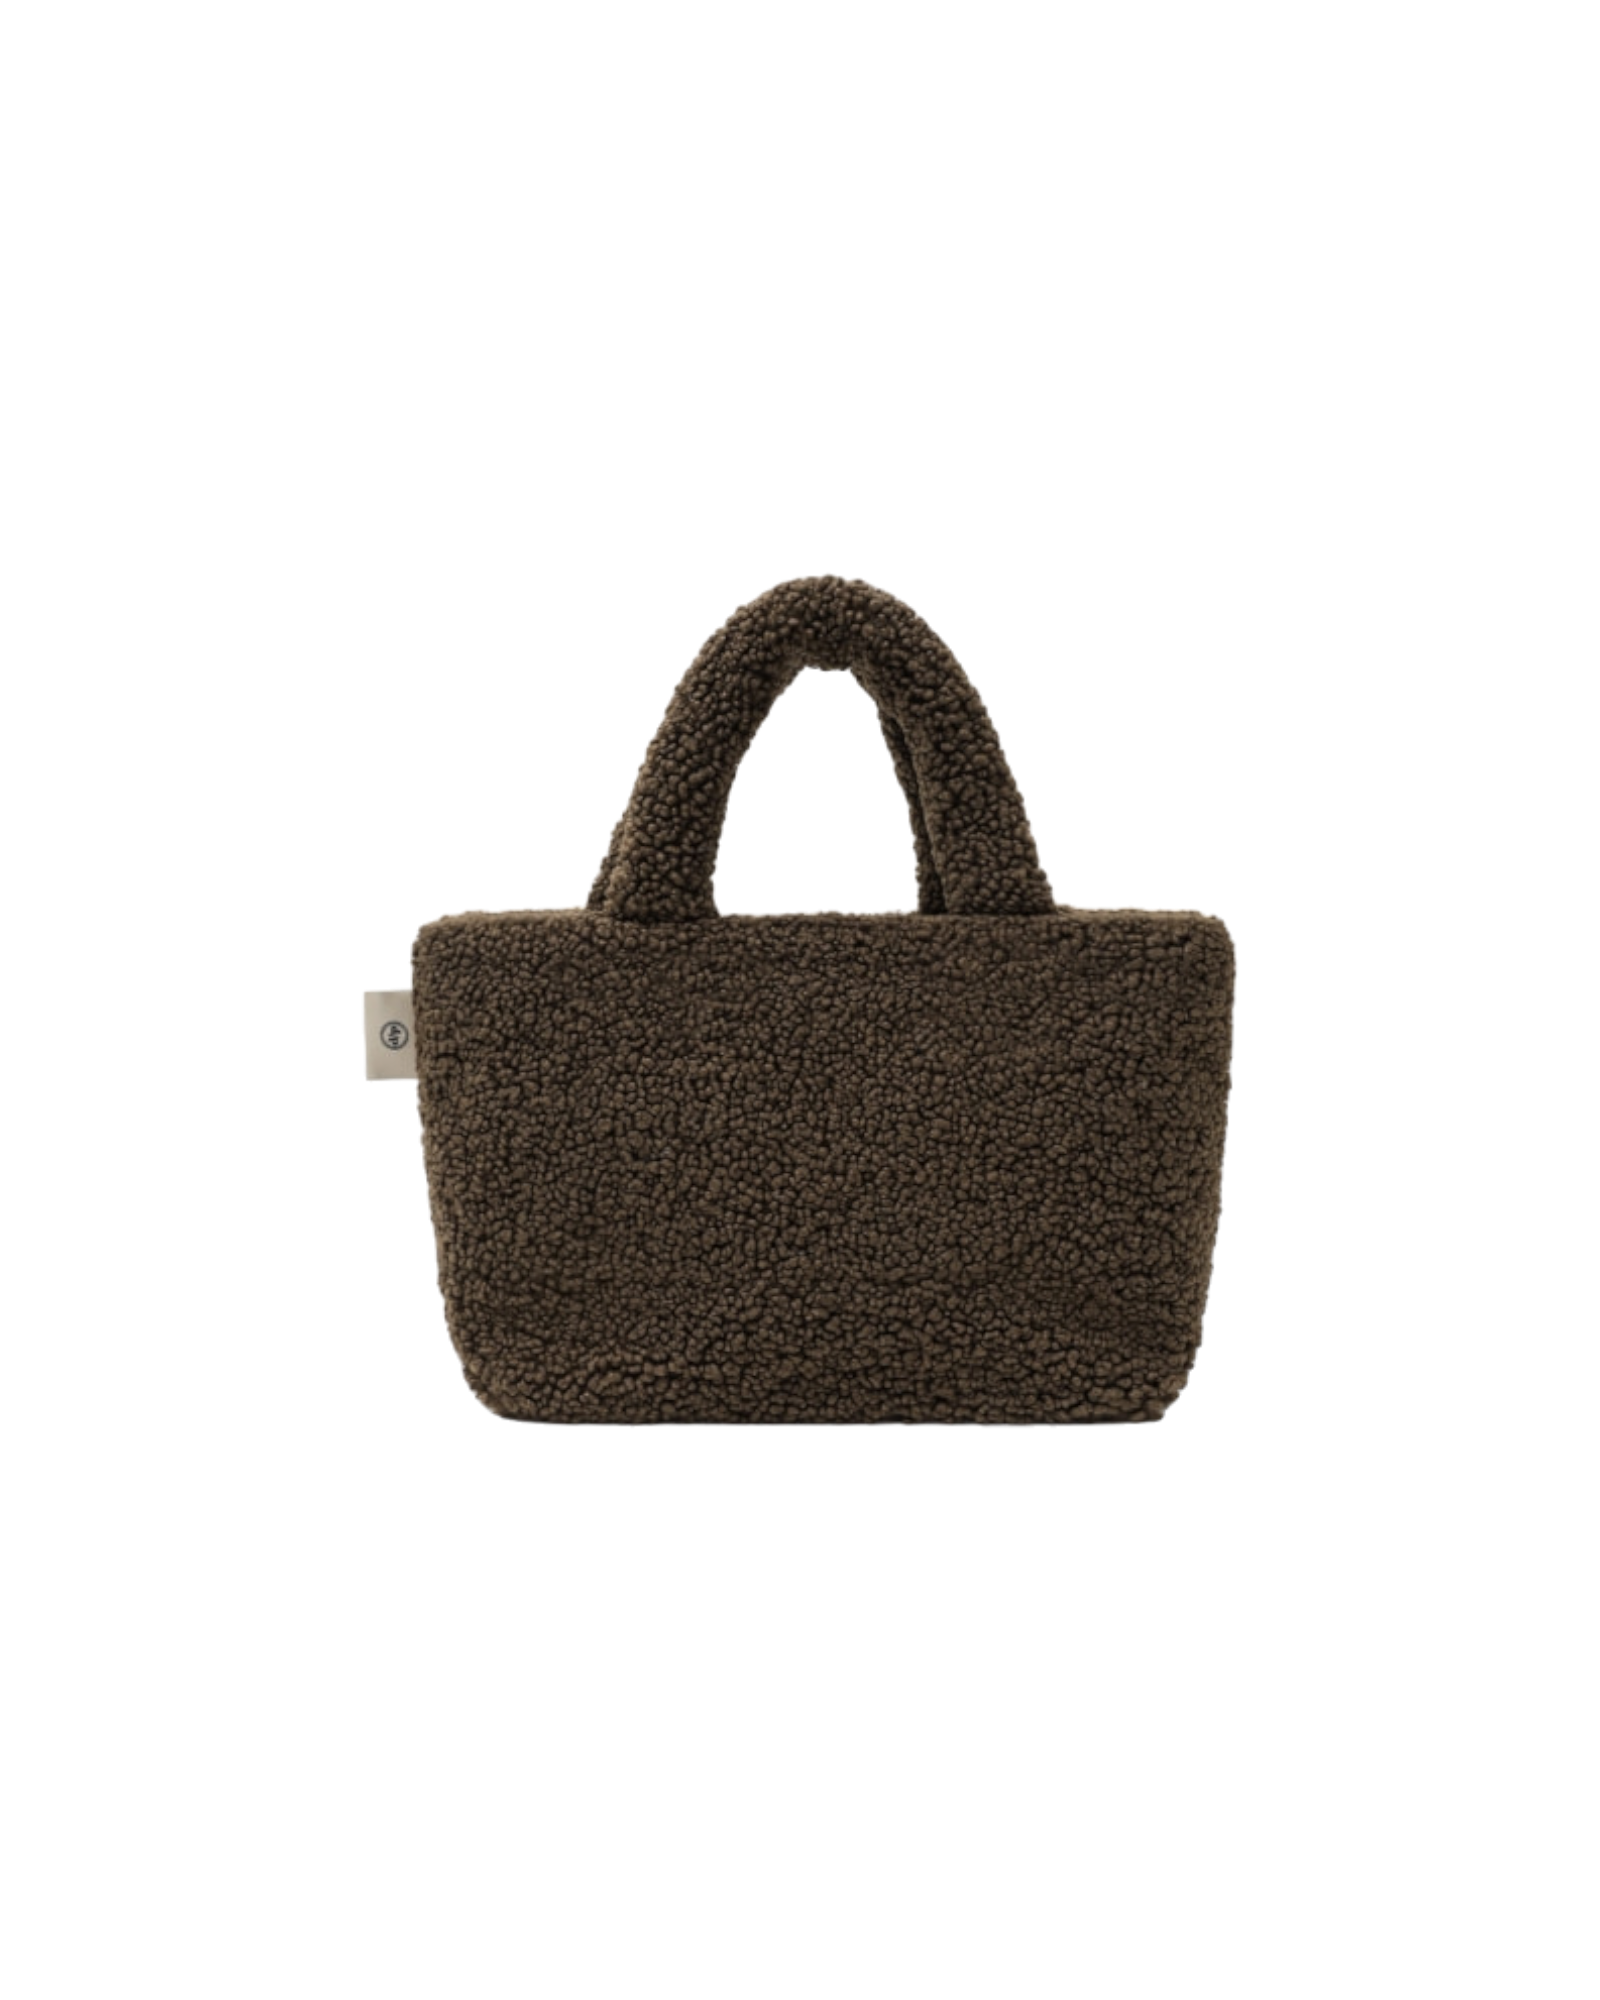 Poodle Bag In Cocoa